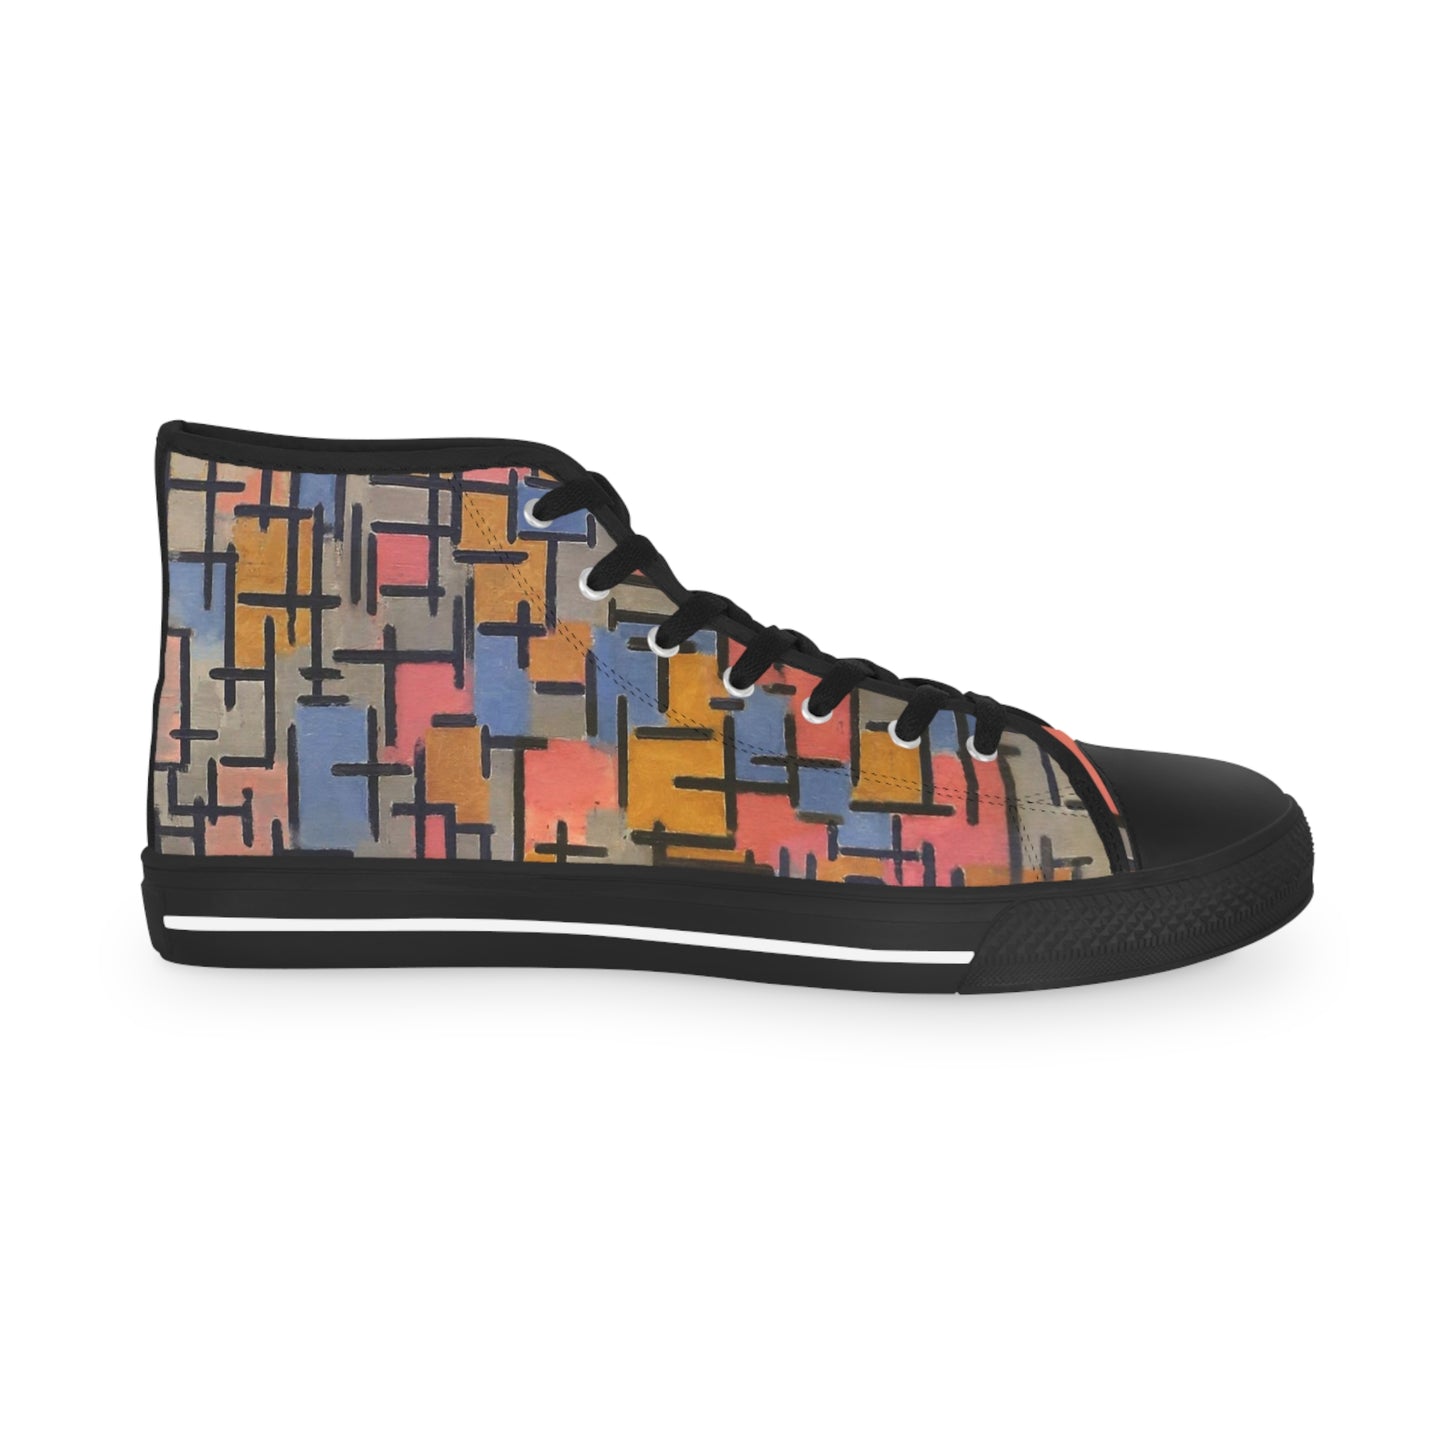 PIET MONDRIAN - COMPOSIZIONE - HIGH TOP SNEAKERS FOR HIM 